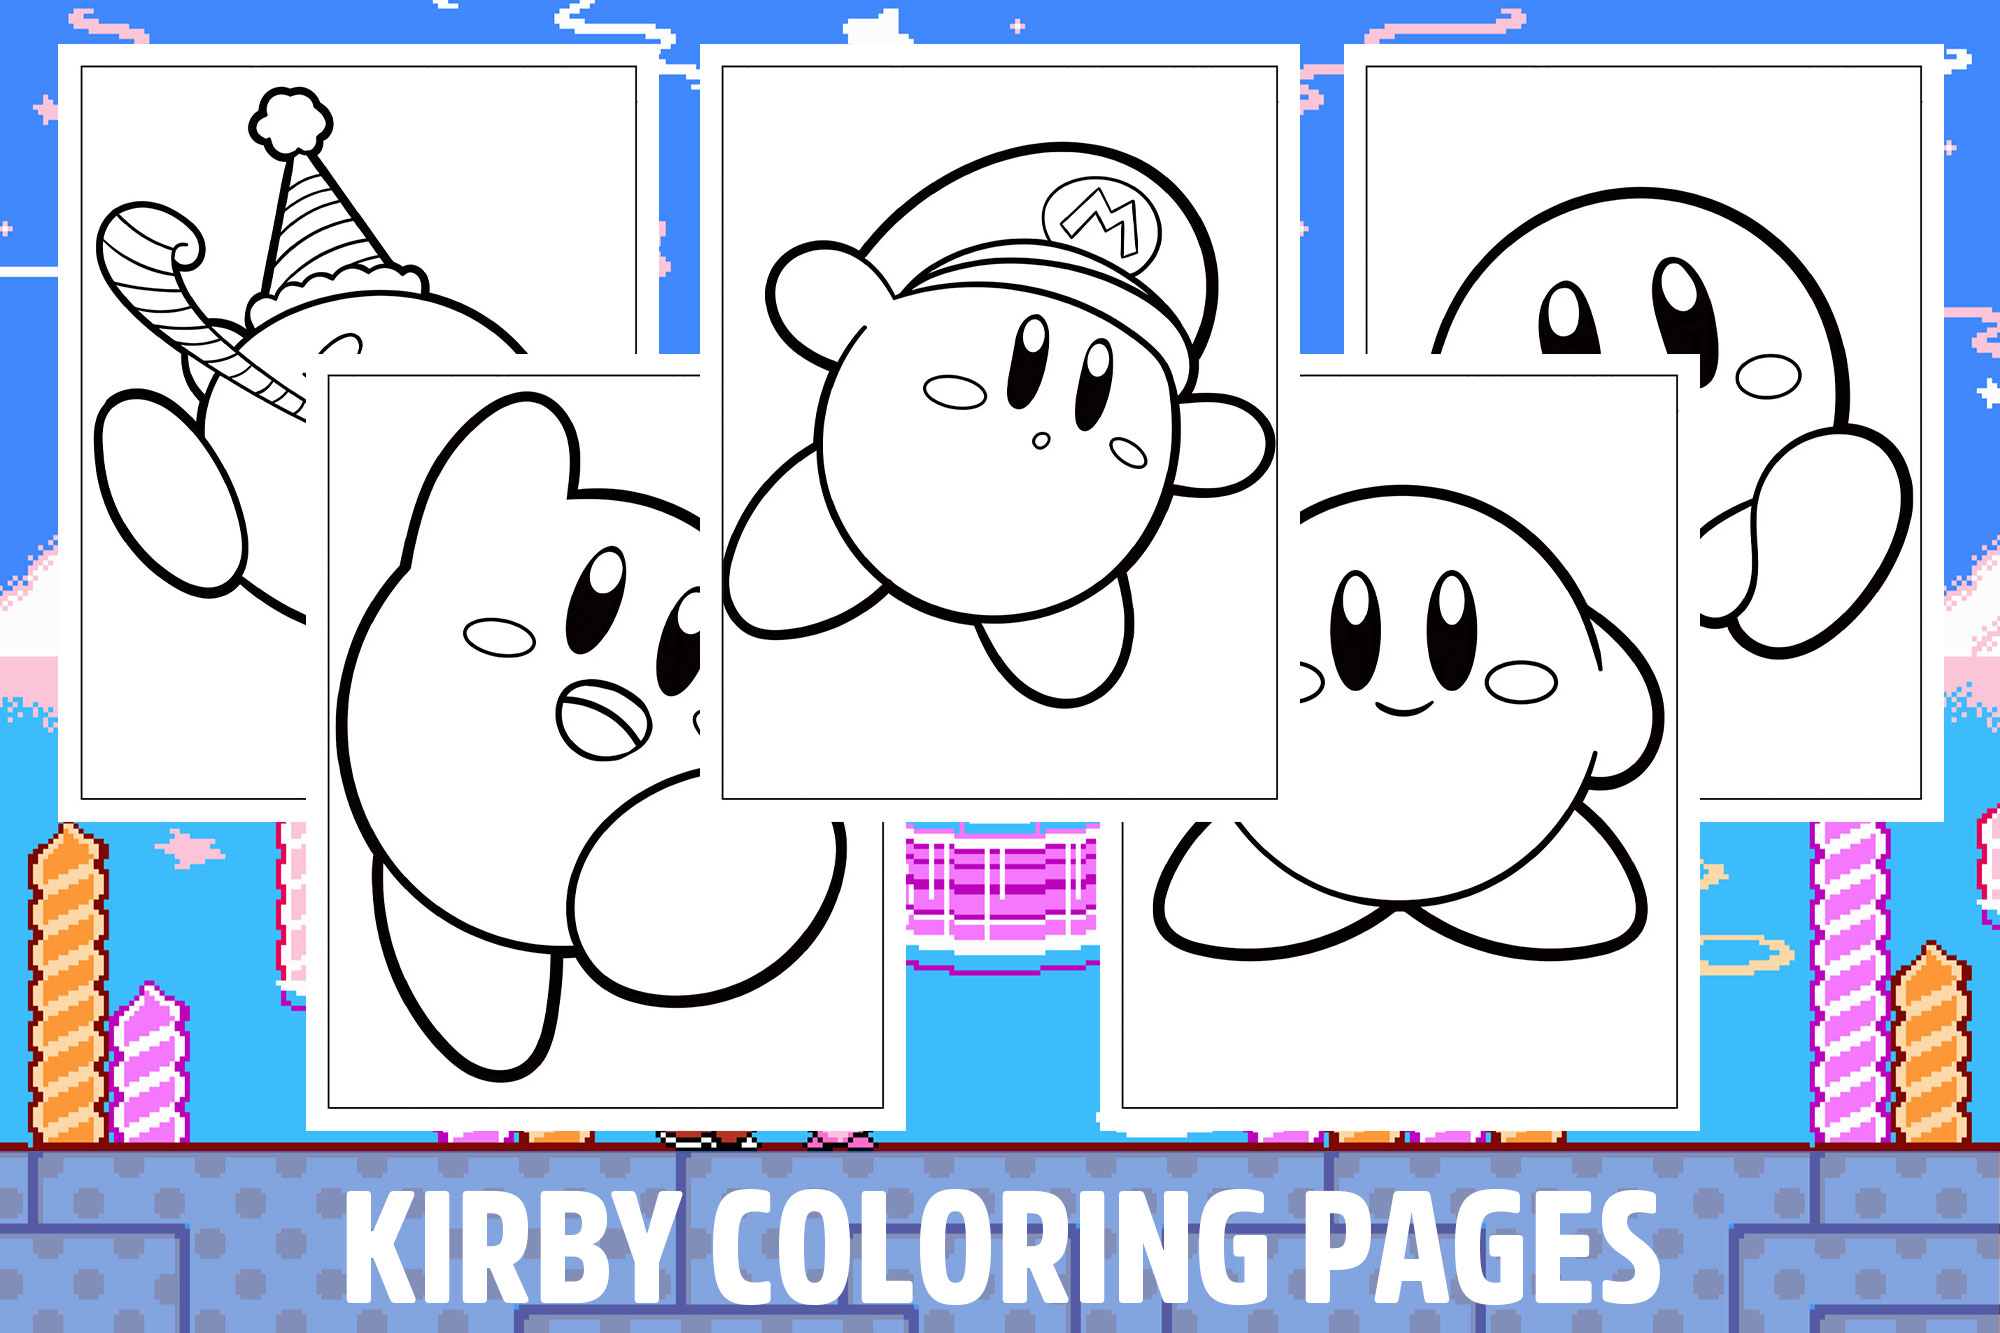 Kirby coloring pages for kids girls boys teens birthday school activity made by teachers